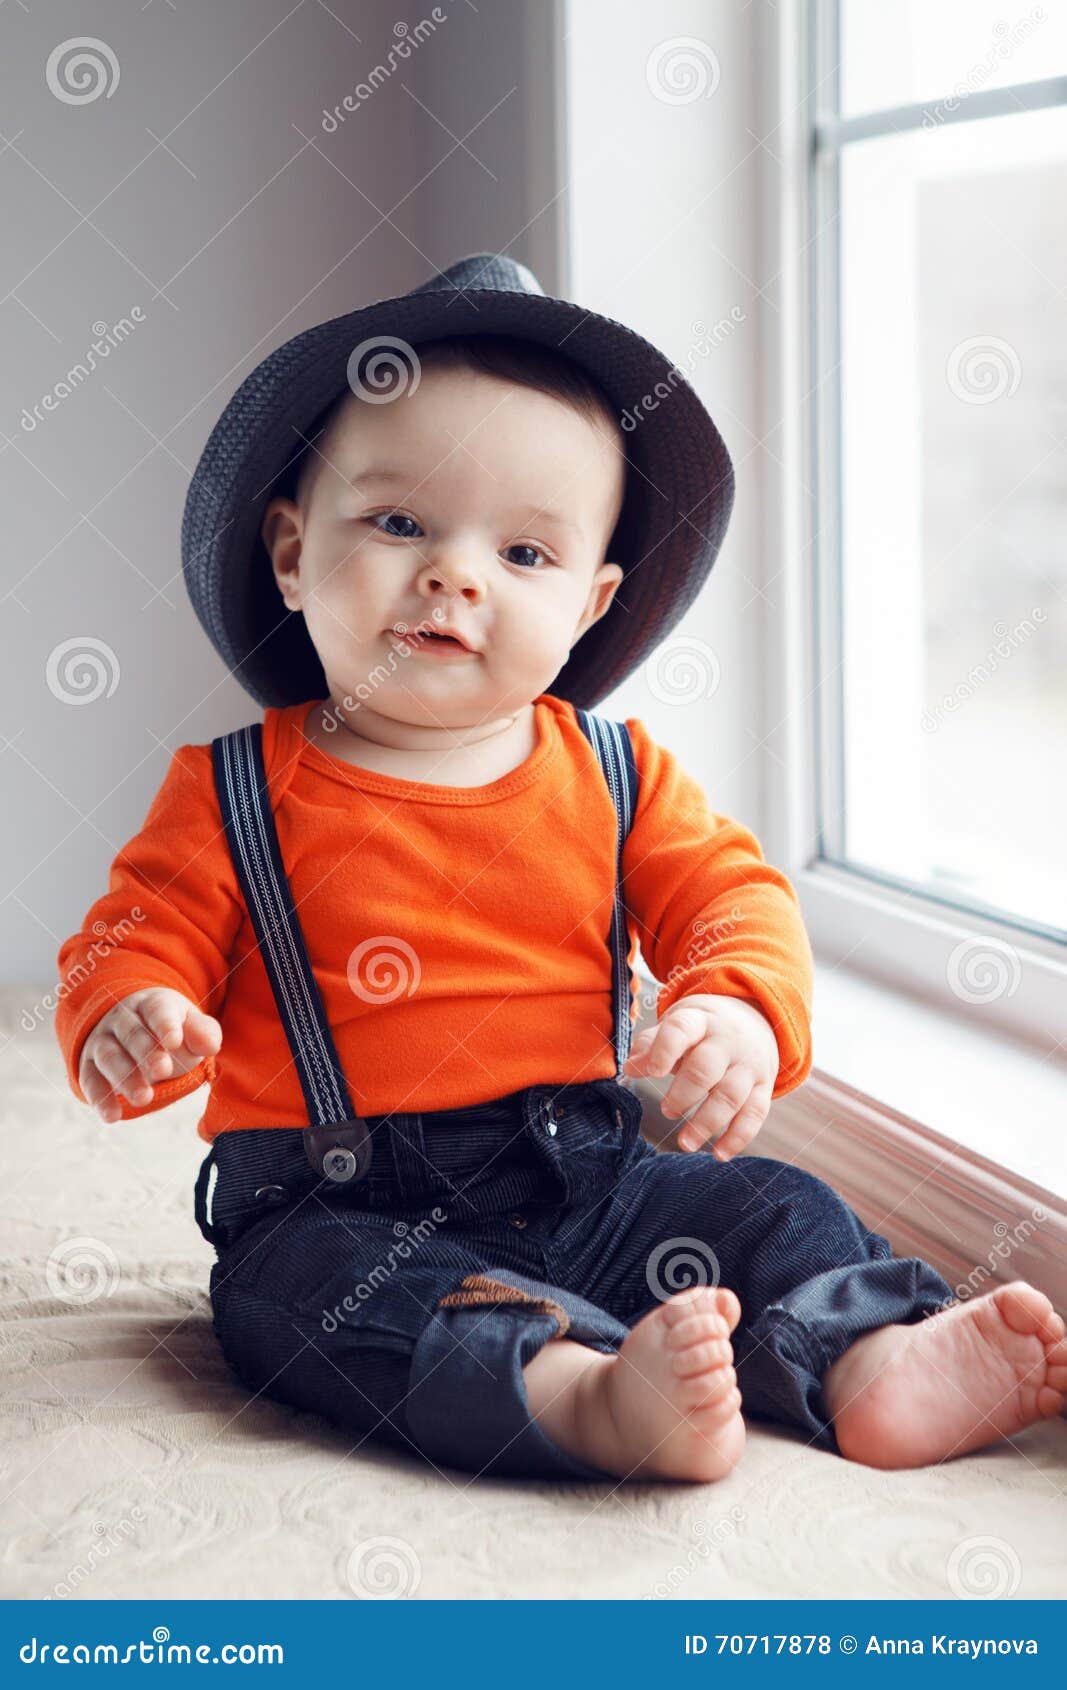 Cute Infant Baby in Hat Near Window Stock Photo - Image of clothes ...